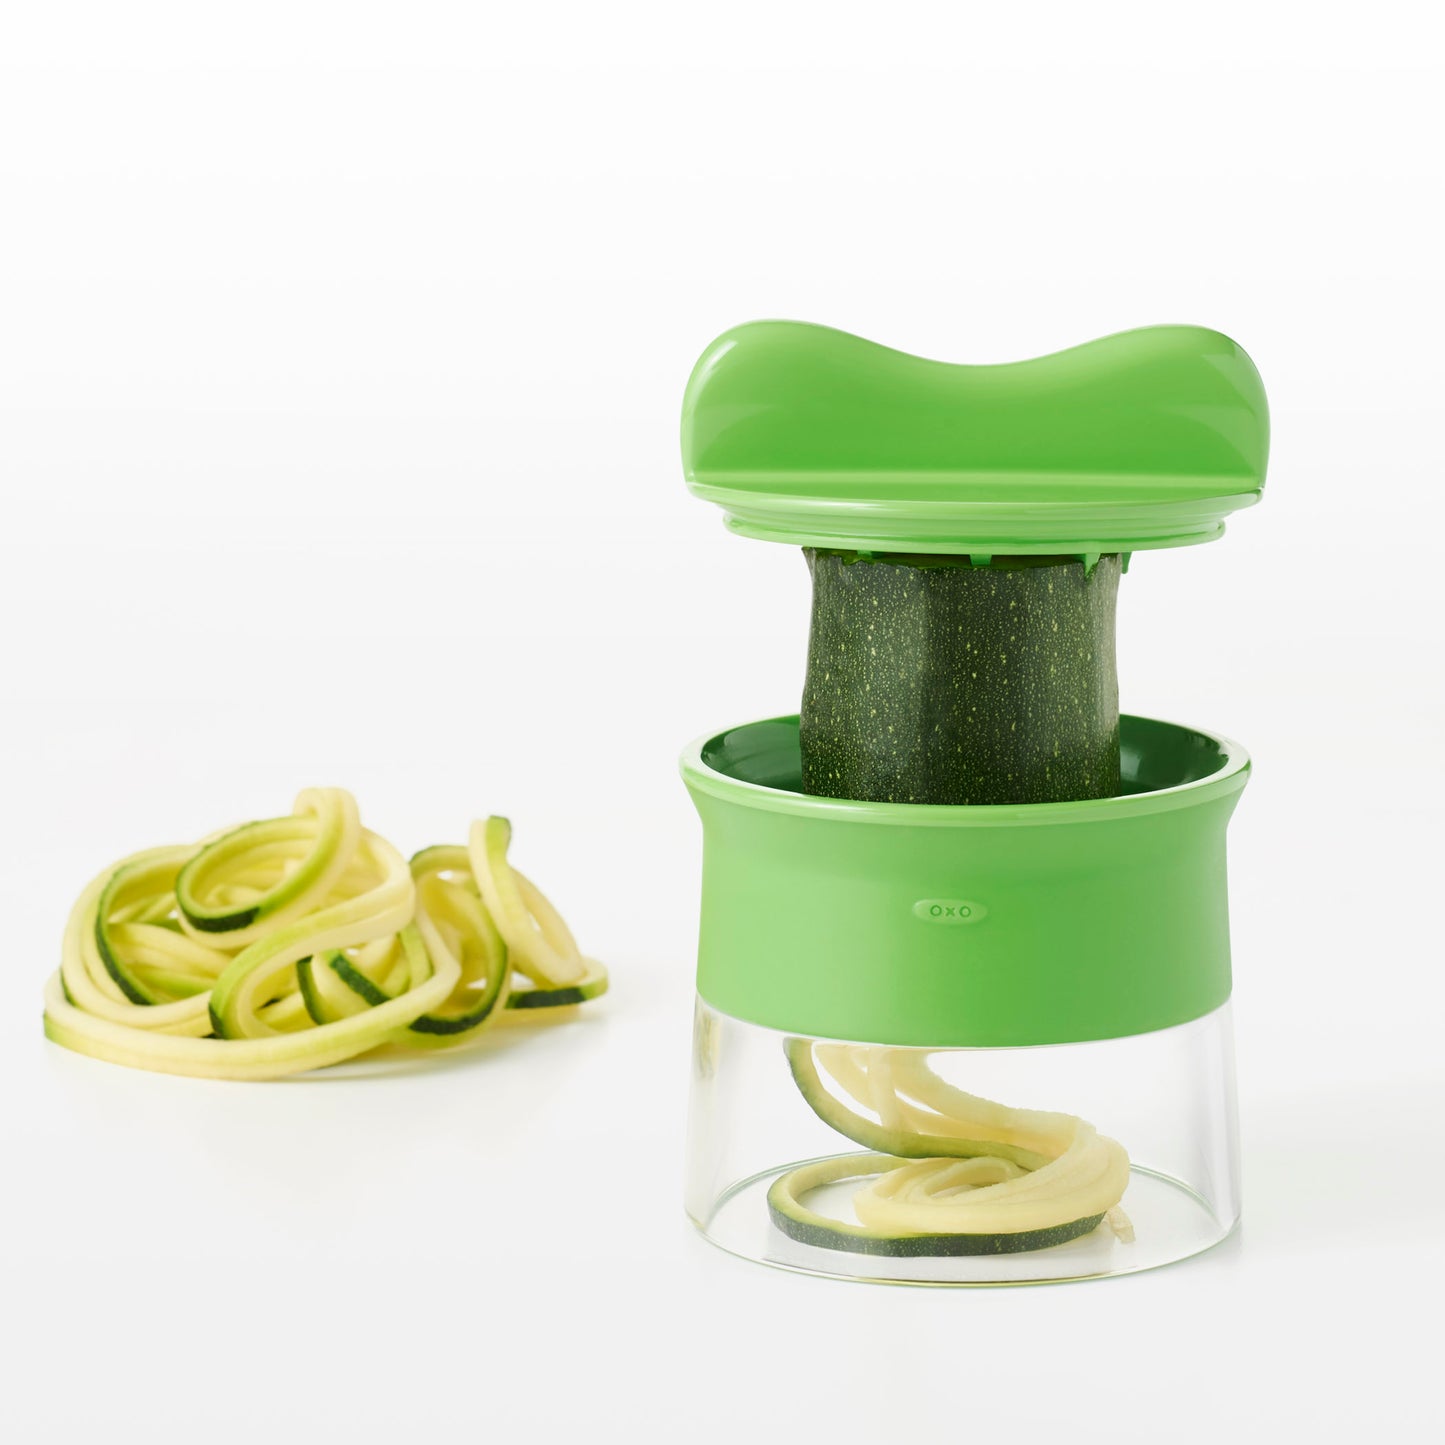 spiralizer with zucchini in it and pile of spiralized zucchini in background.